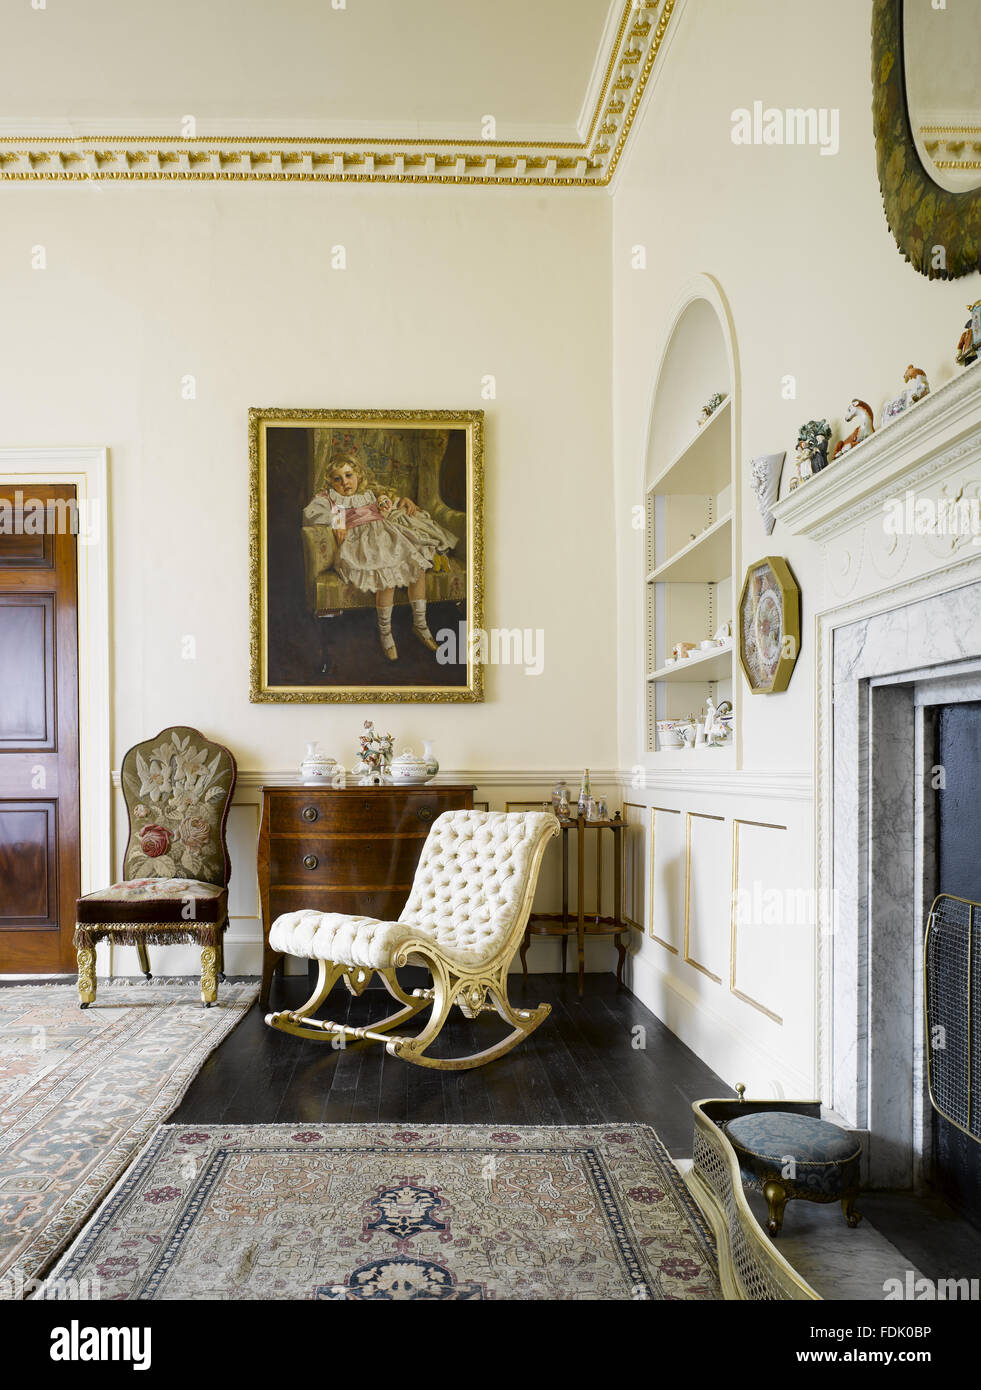 The Morning Room at Greenway, Devon, which was the holiday home of the  crime writer Agatha Christie. The painting is a portrait of Agatha Miller,  aged 4, called LOST IN REVERIE, by